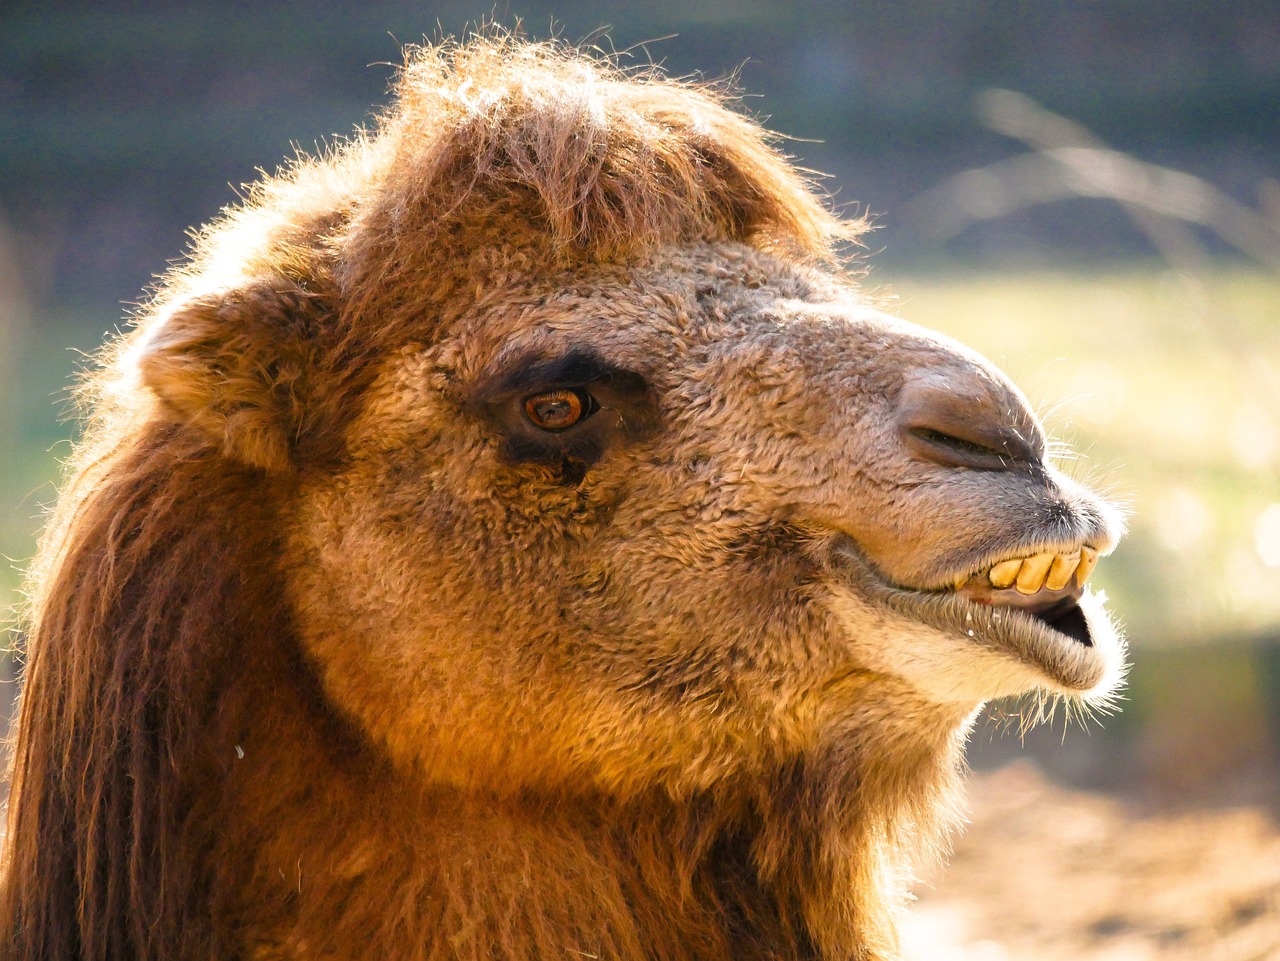 a close up of a camel with its mouth open, a picture, shutterstock, hurufiyya, lama with dreadlocks, fierce expression 4k, australian, wallpaper - 1 0 2 4